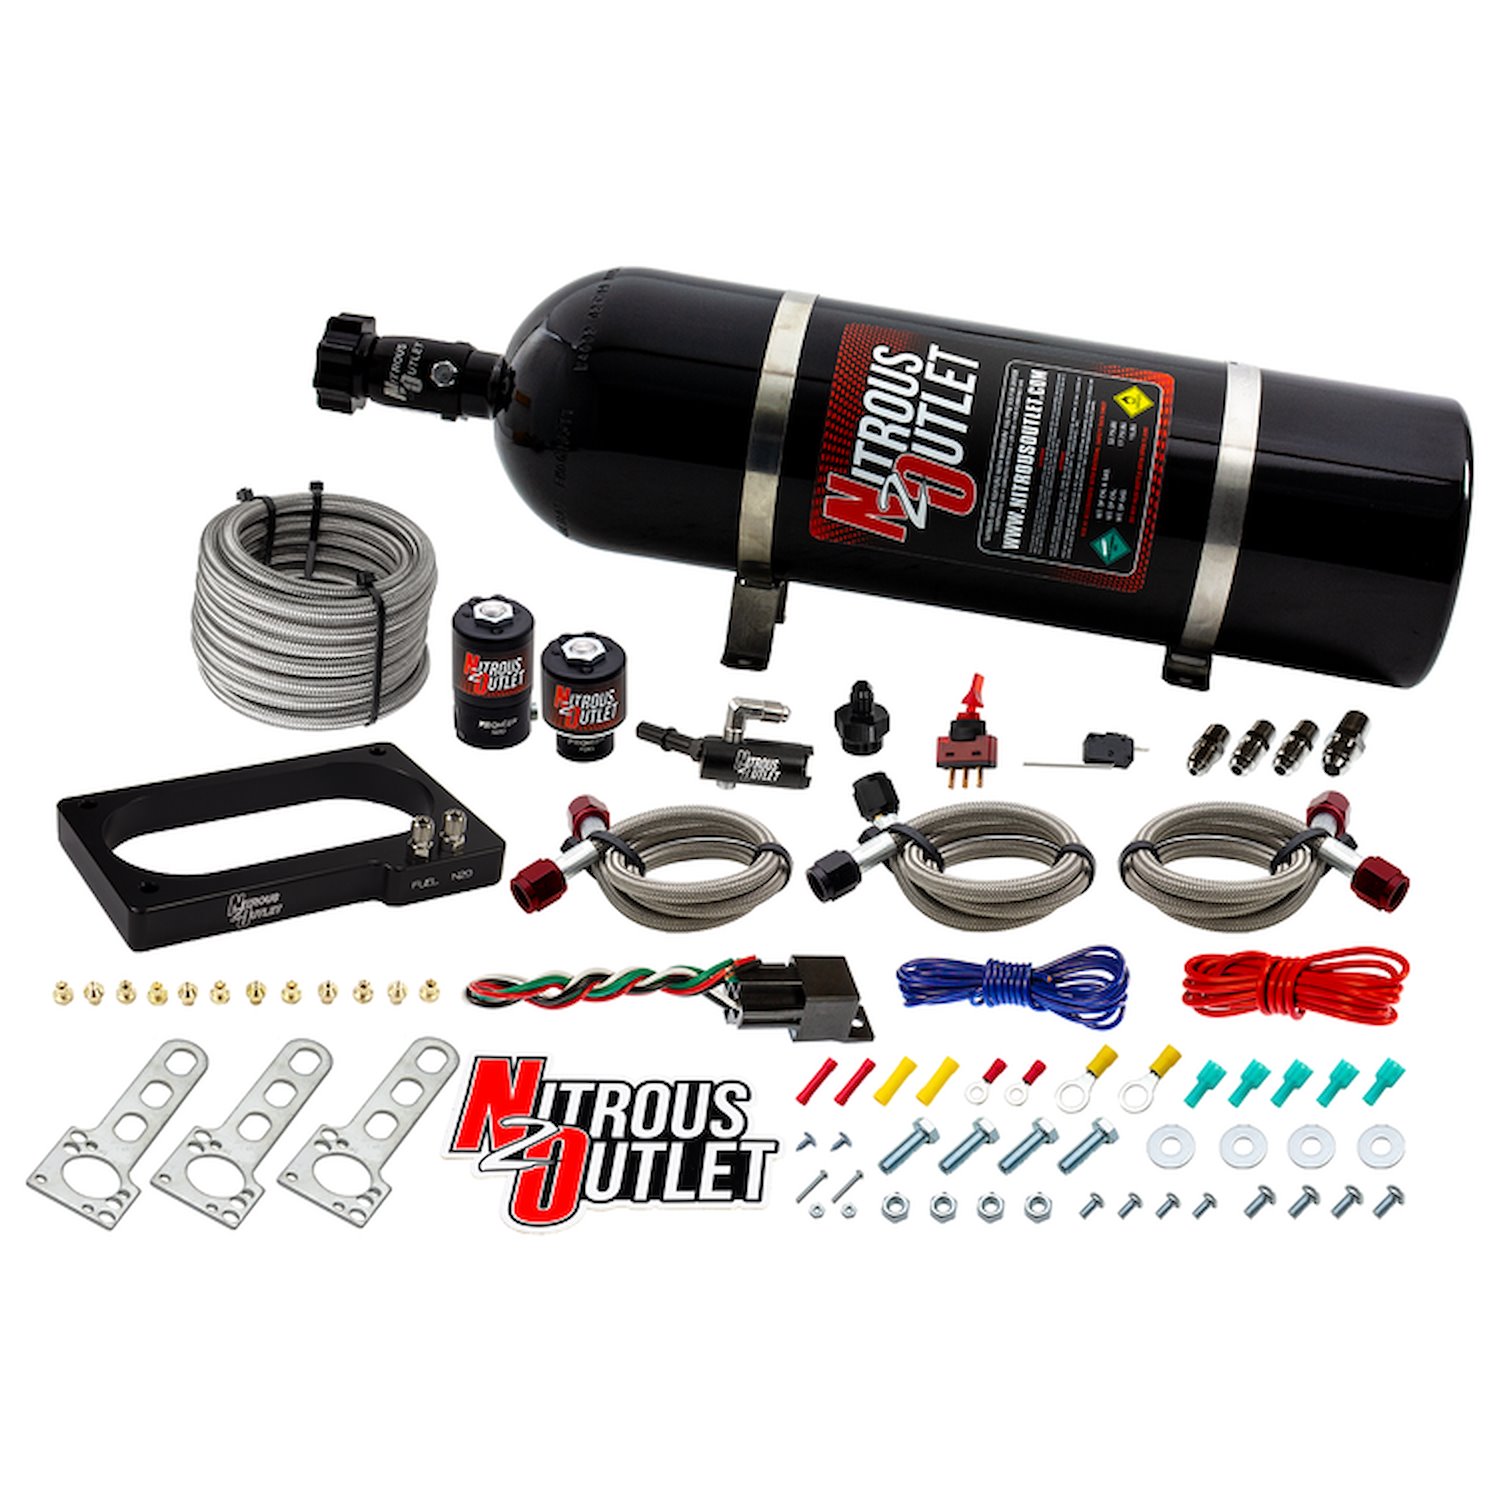 00-10152-15 Ford 2007-2014 GT 500 Mustang Plate System, Gas/E85, 5-55psi, 50-200HP, 15lb Bottle